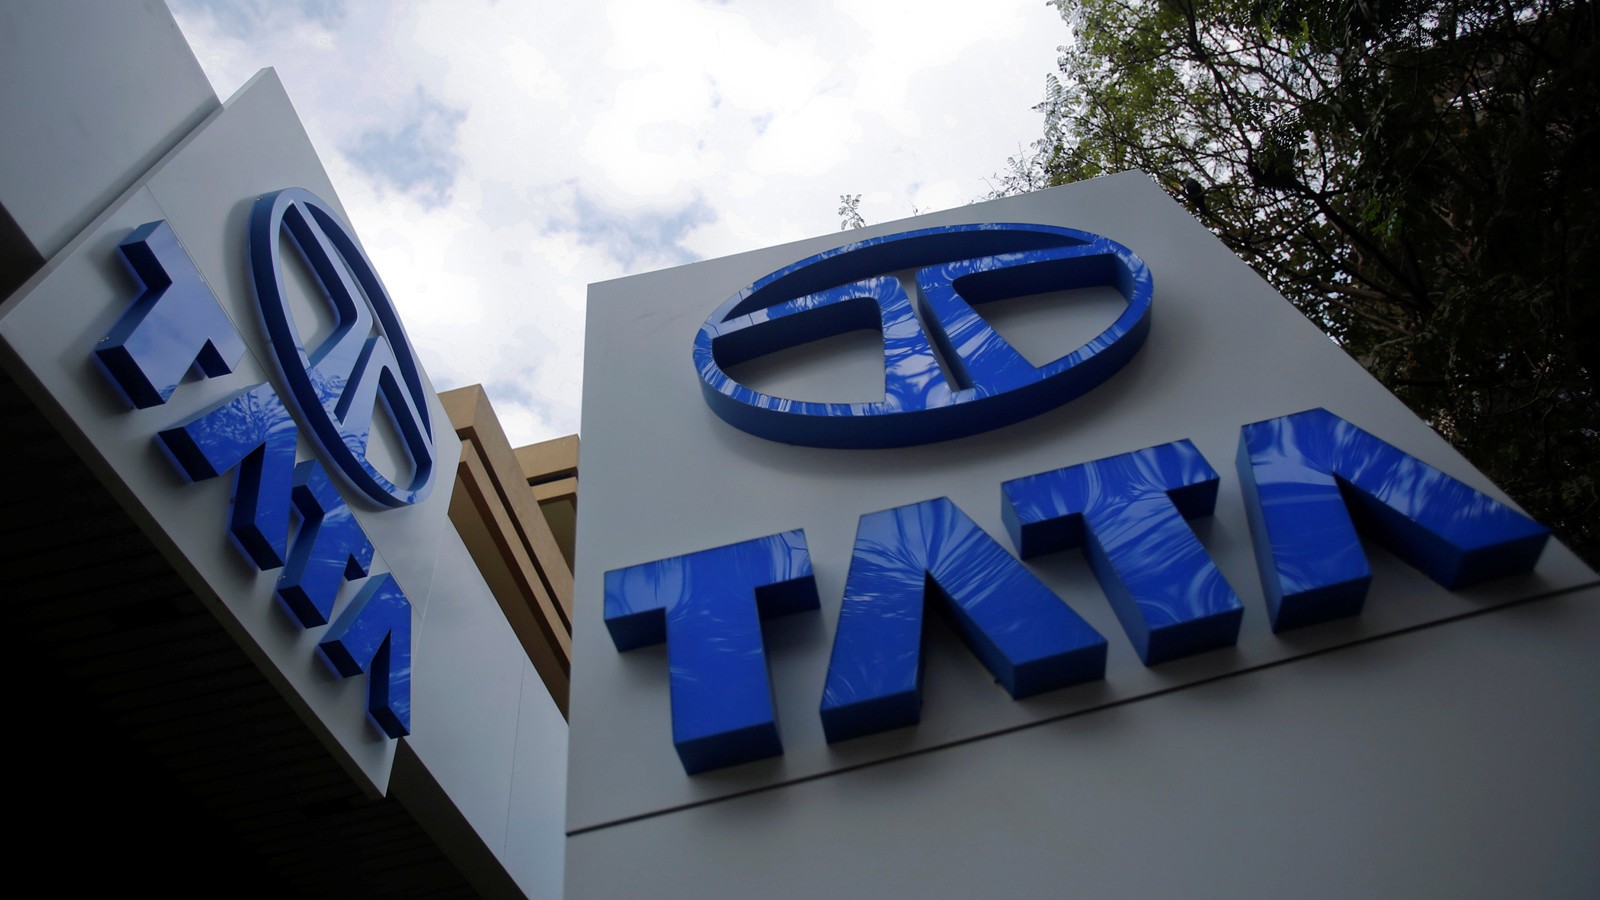 Tata Motors logos are seen at their flagship showroom before the announcement of their Q3 results in Mumbai